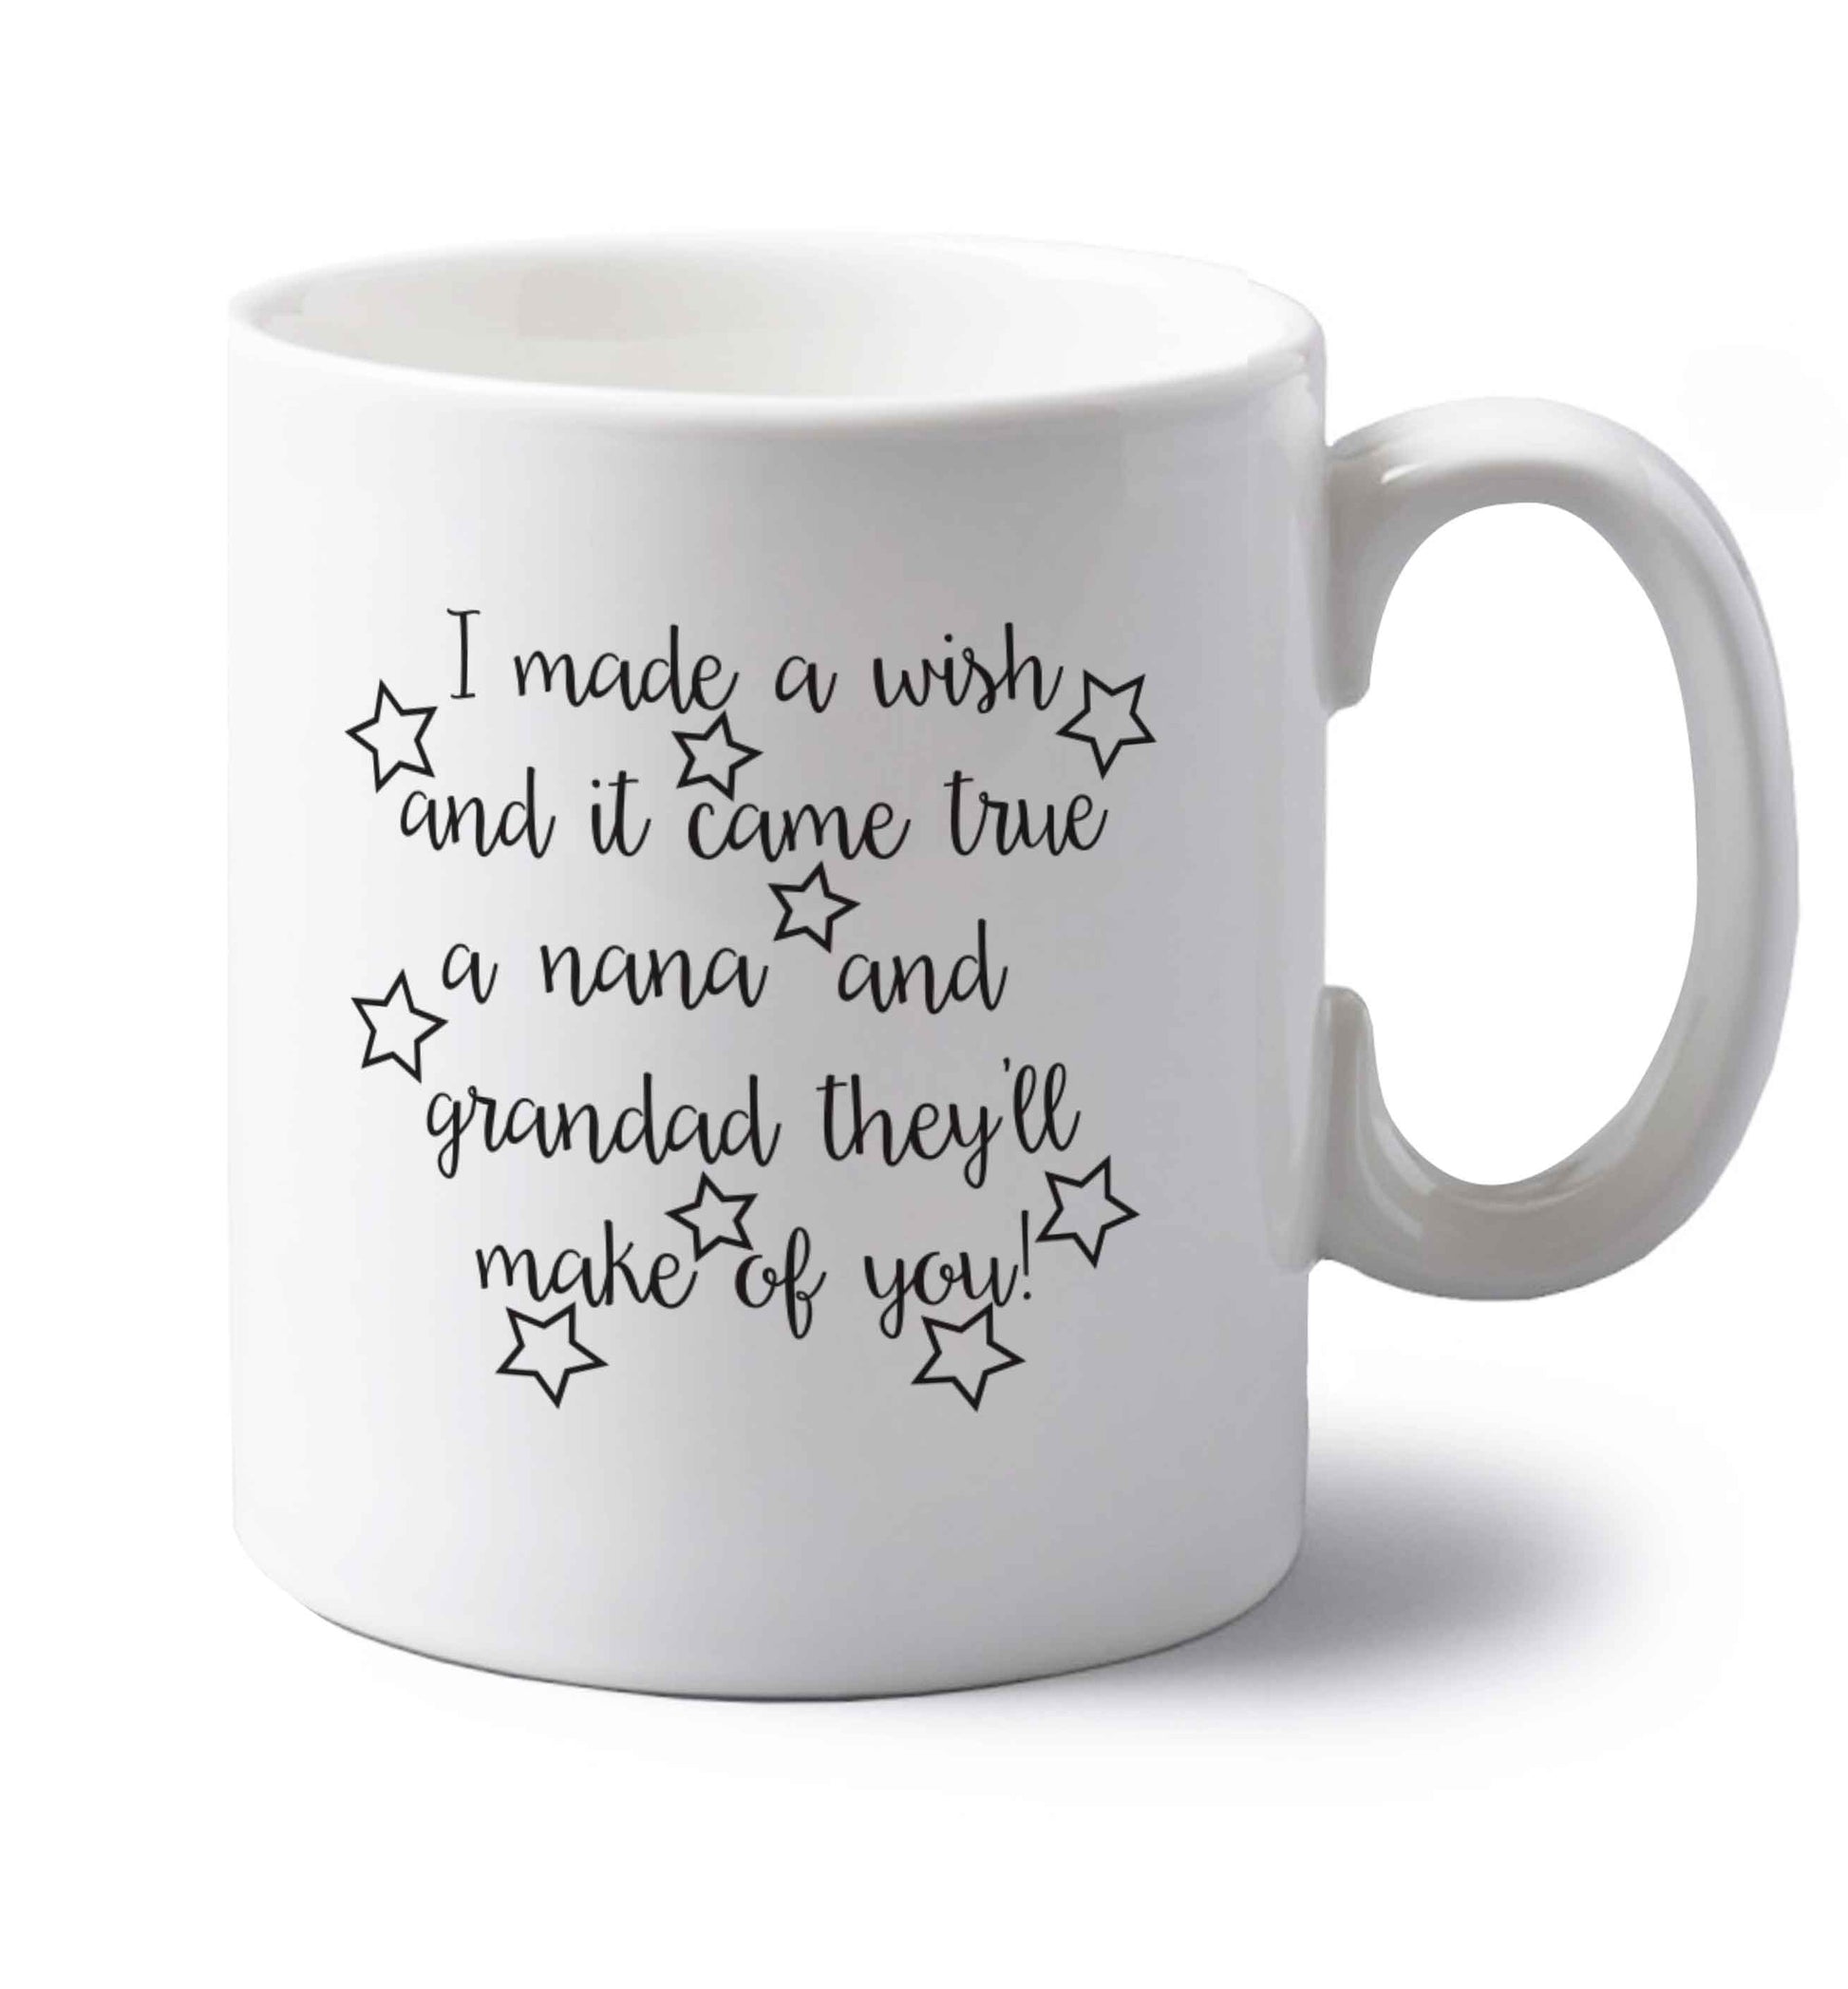 I made a wish and it came true a nana and grandad they'll make of you! left handed white ceramic mug 